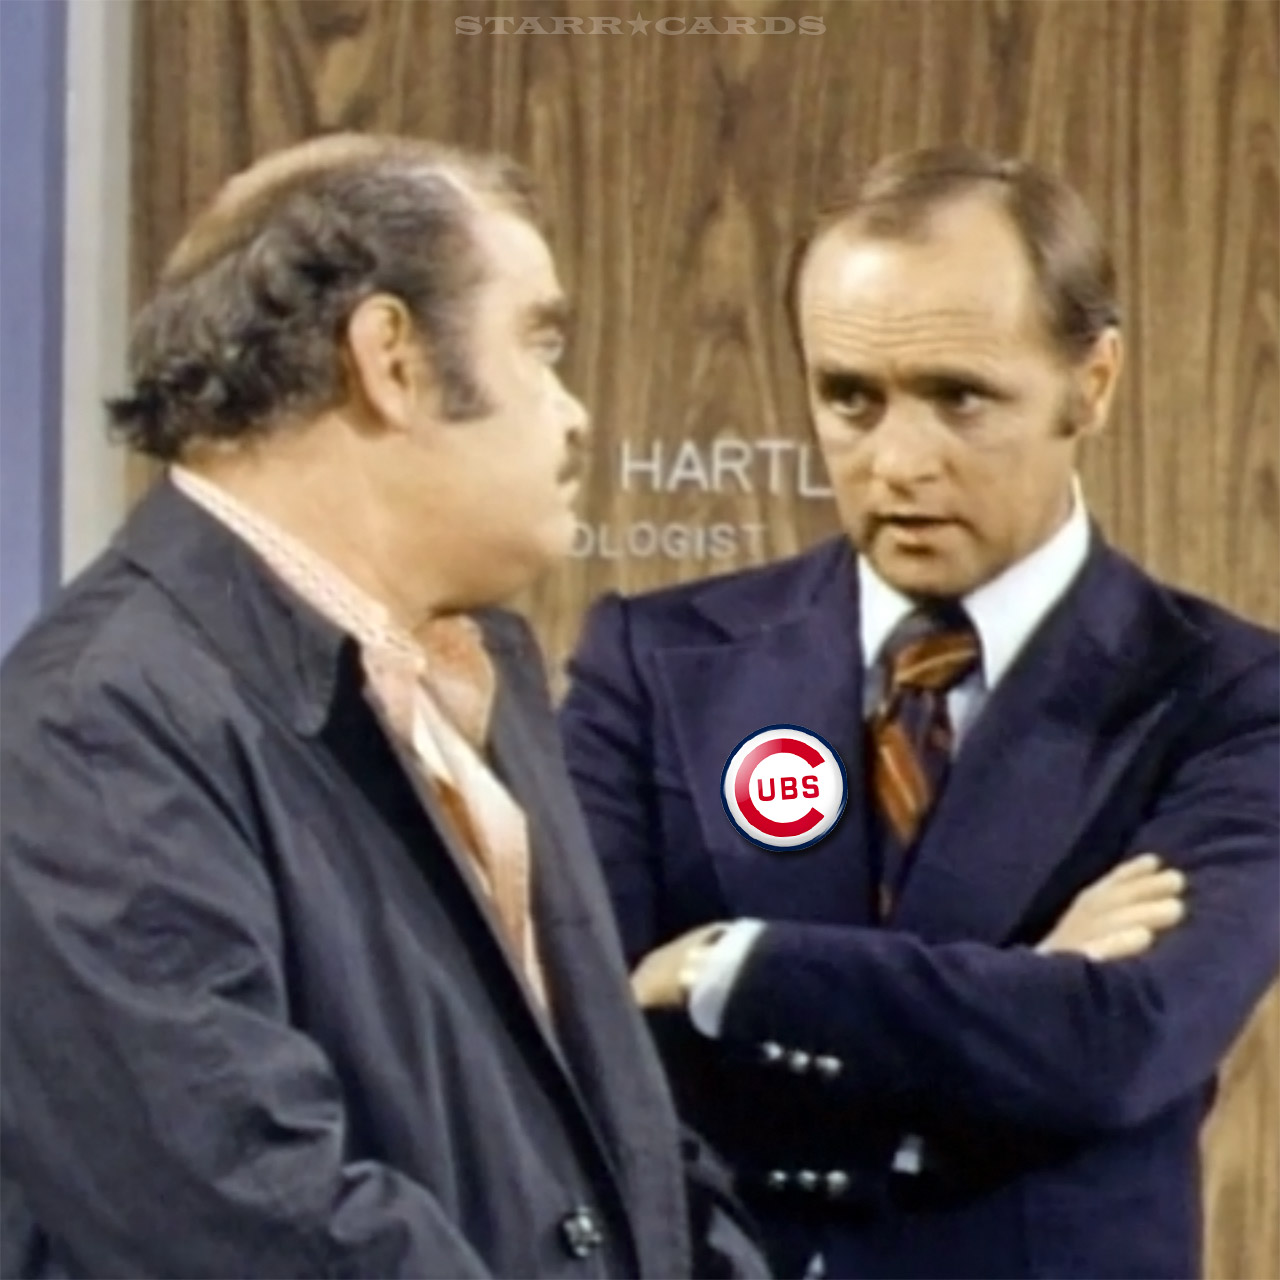 Bob Newhart tries to help Chicago Cubs but "You Can't Win 'Em All"